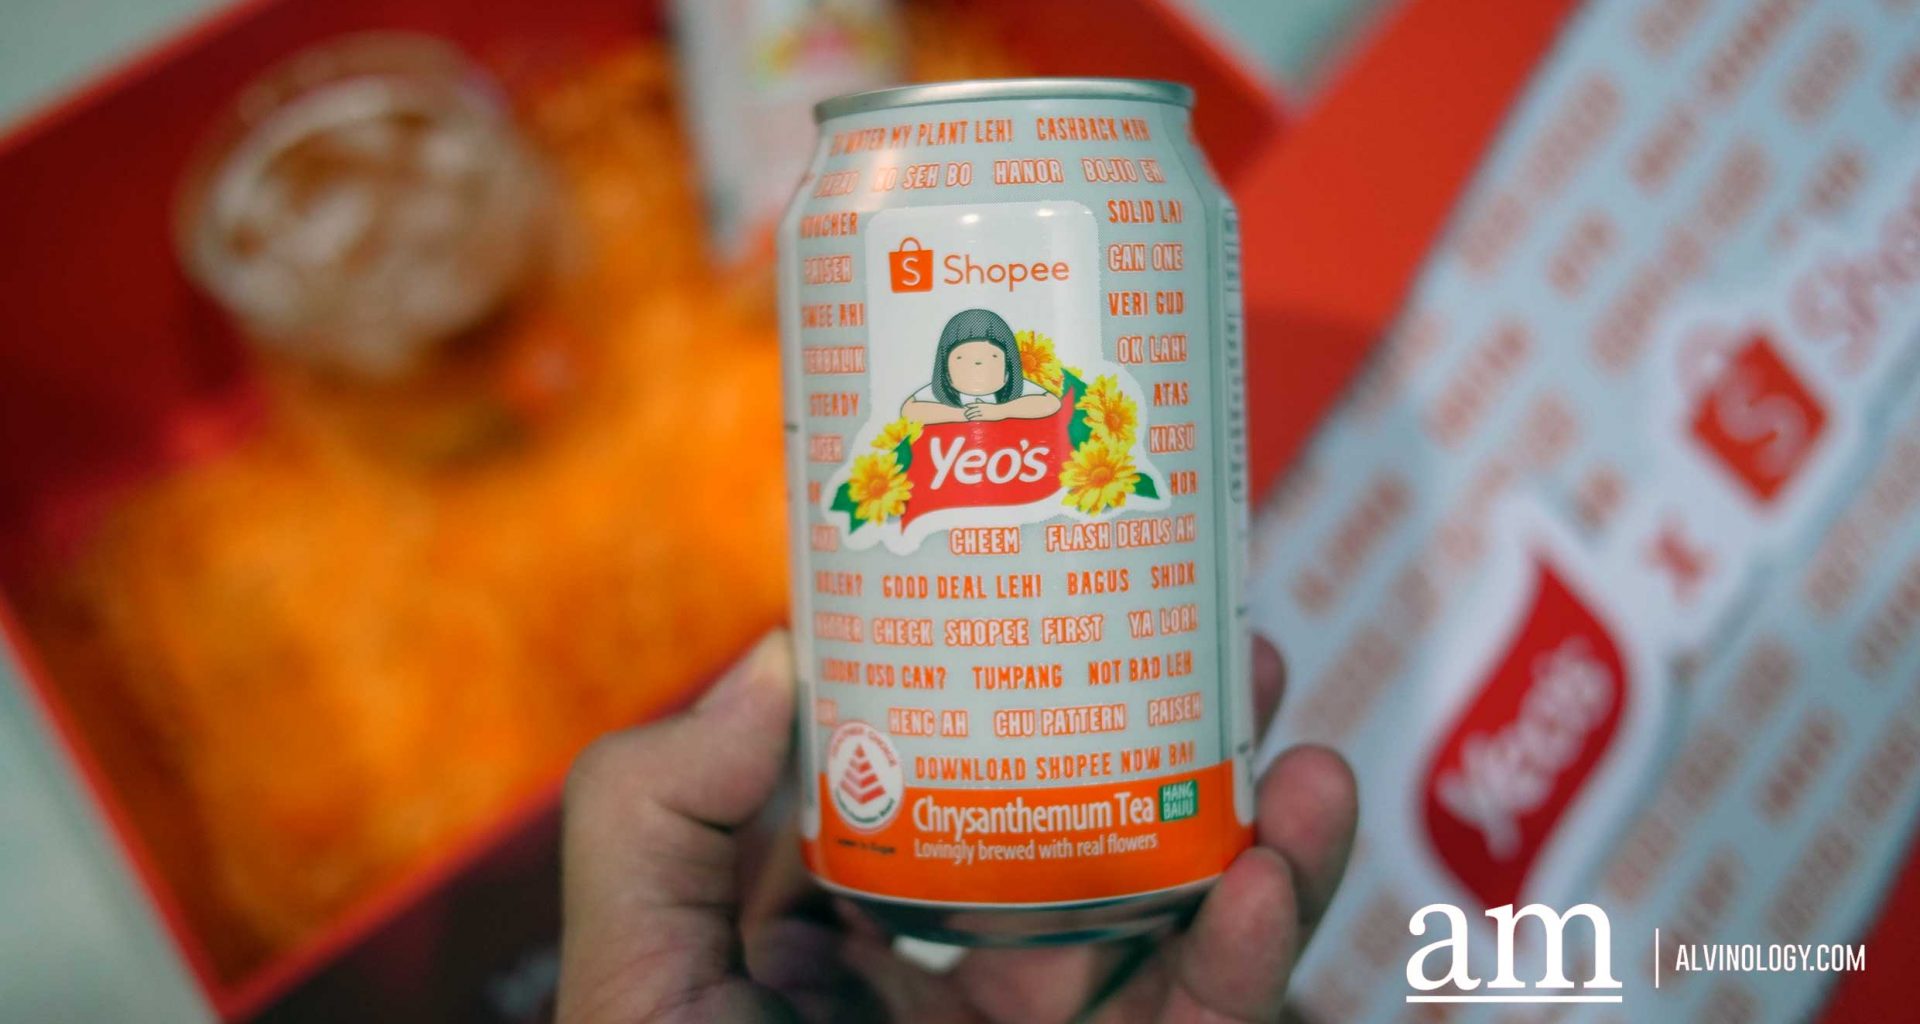 [PROMOTION] limited edition Shopee x Yeo's Chrysanthemum Tea - specially for Singapore's National Day - Alvinology